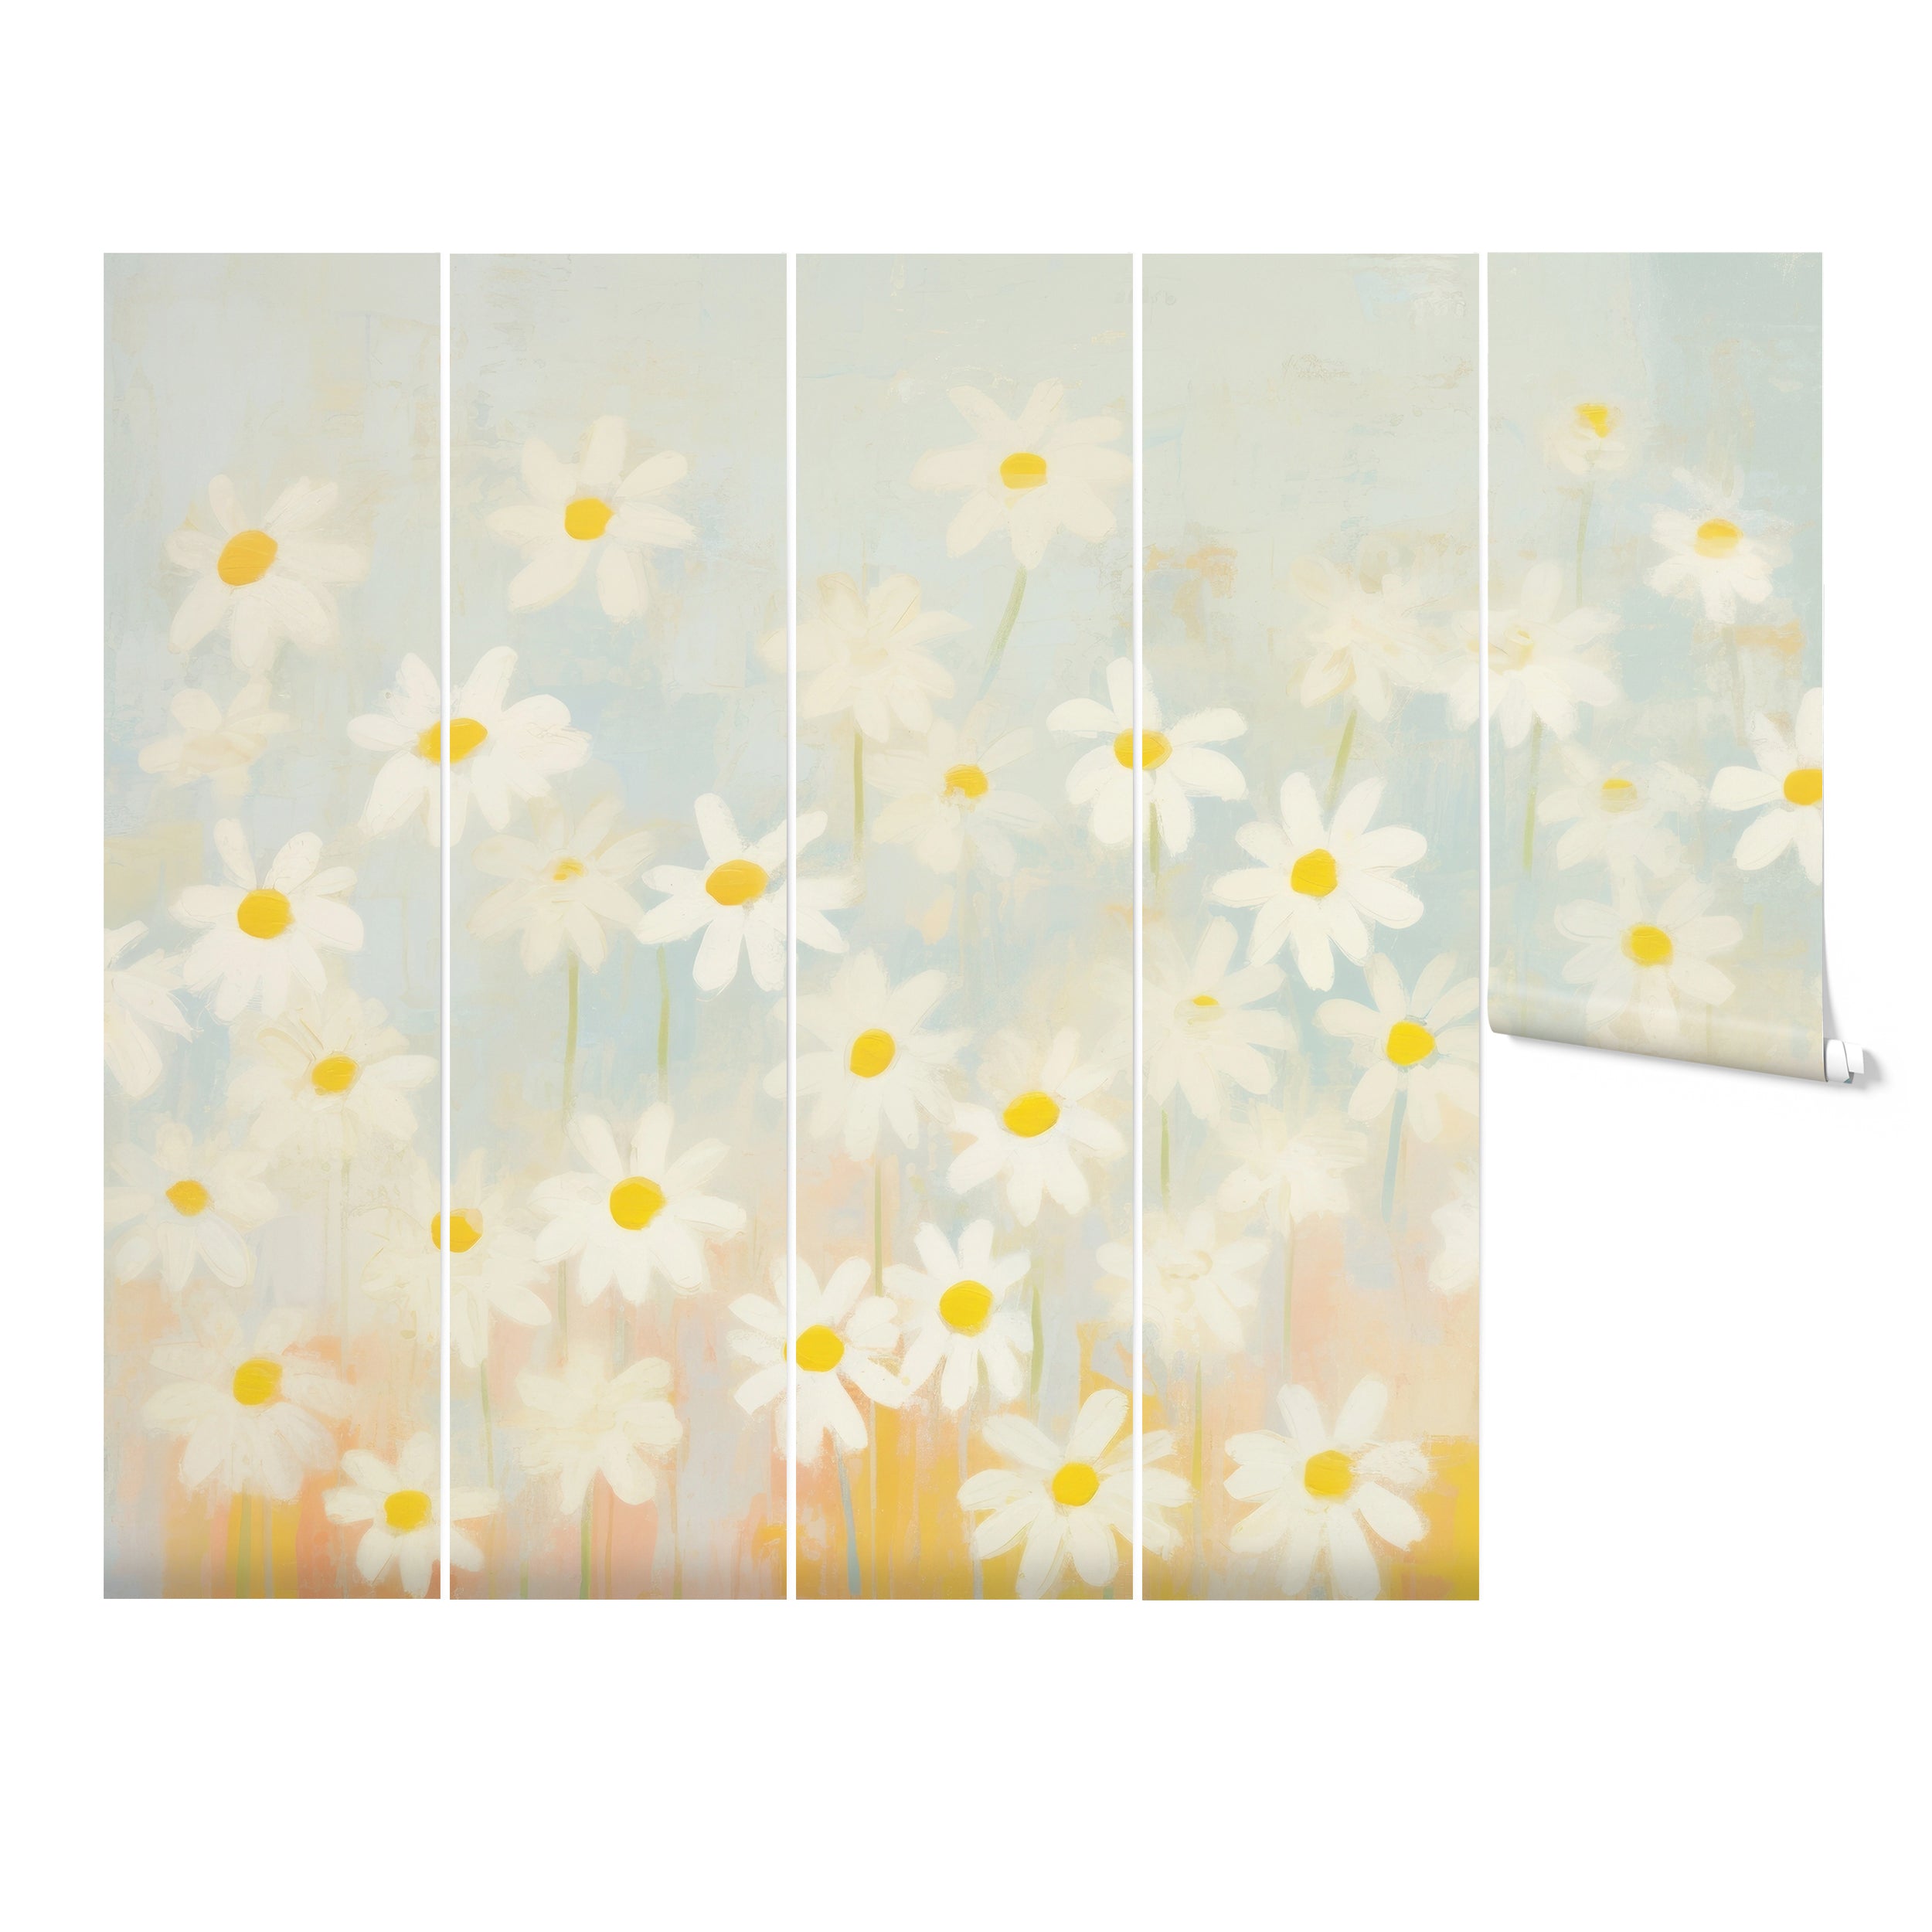 Spring Daisy Mural featuring white daisies with yellow centers against a soft pastel background